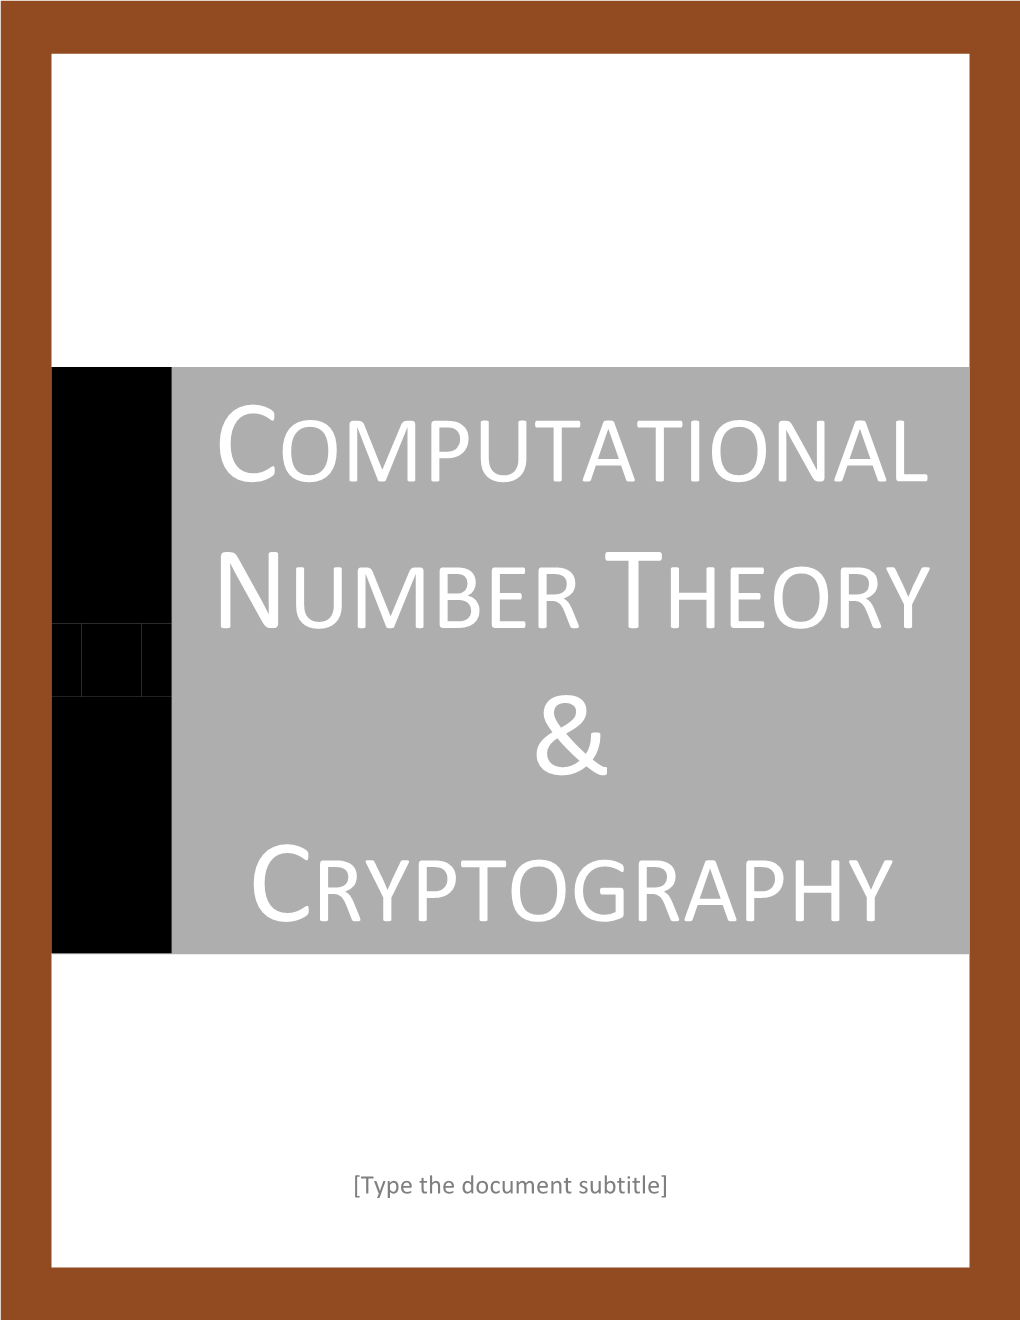 Computational Number Theory & Cryptography